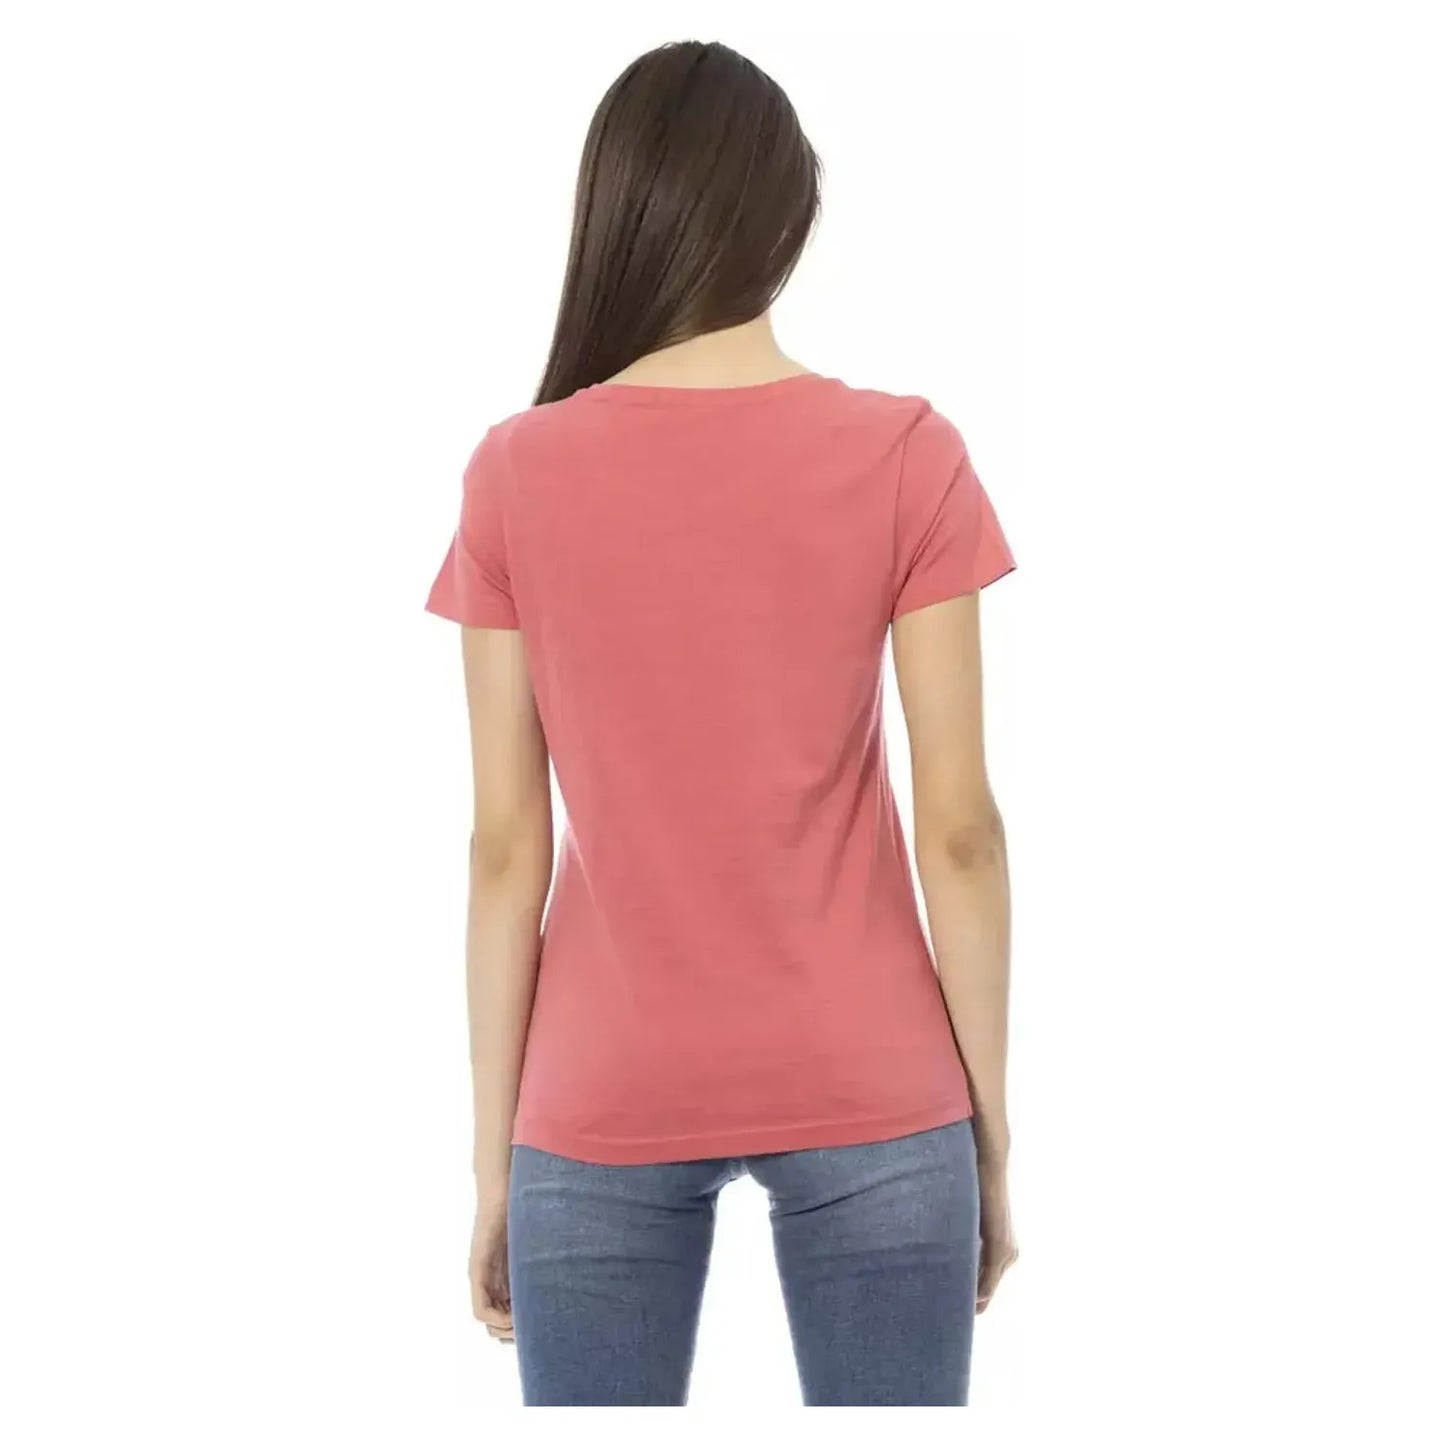 Trussardi Action Elegant Pink Short Sleeve Tee with Chic Print pink-cotton-tops-t-shirt-39